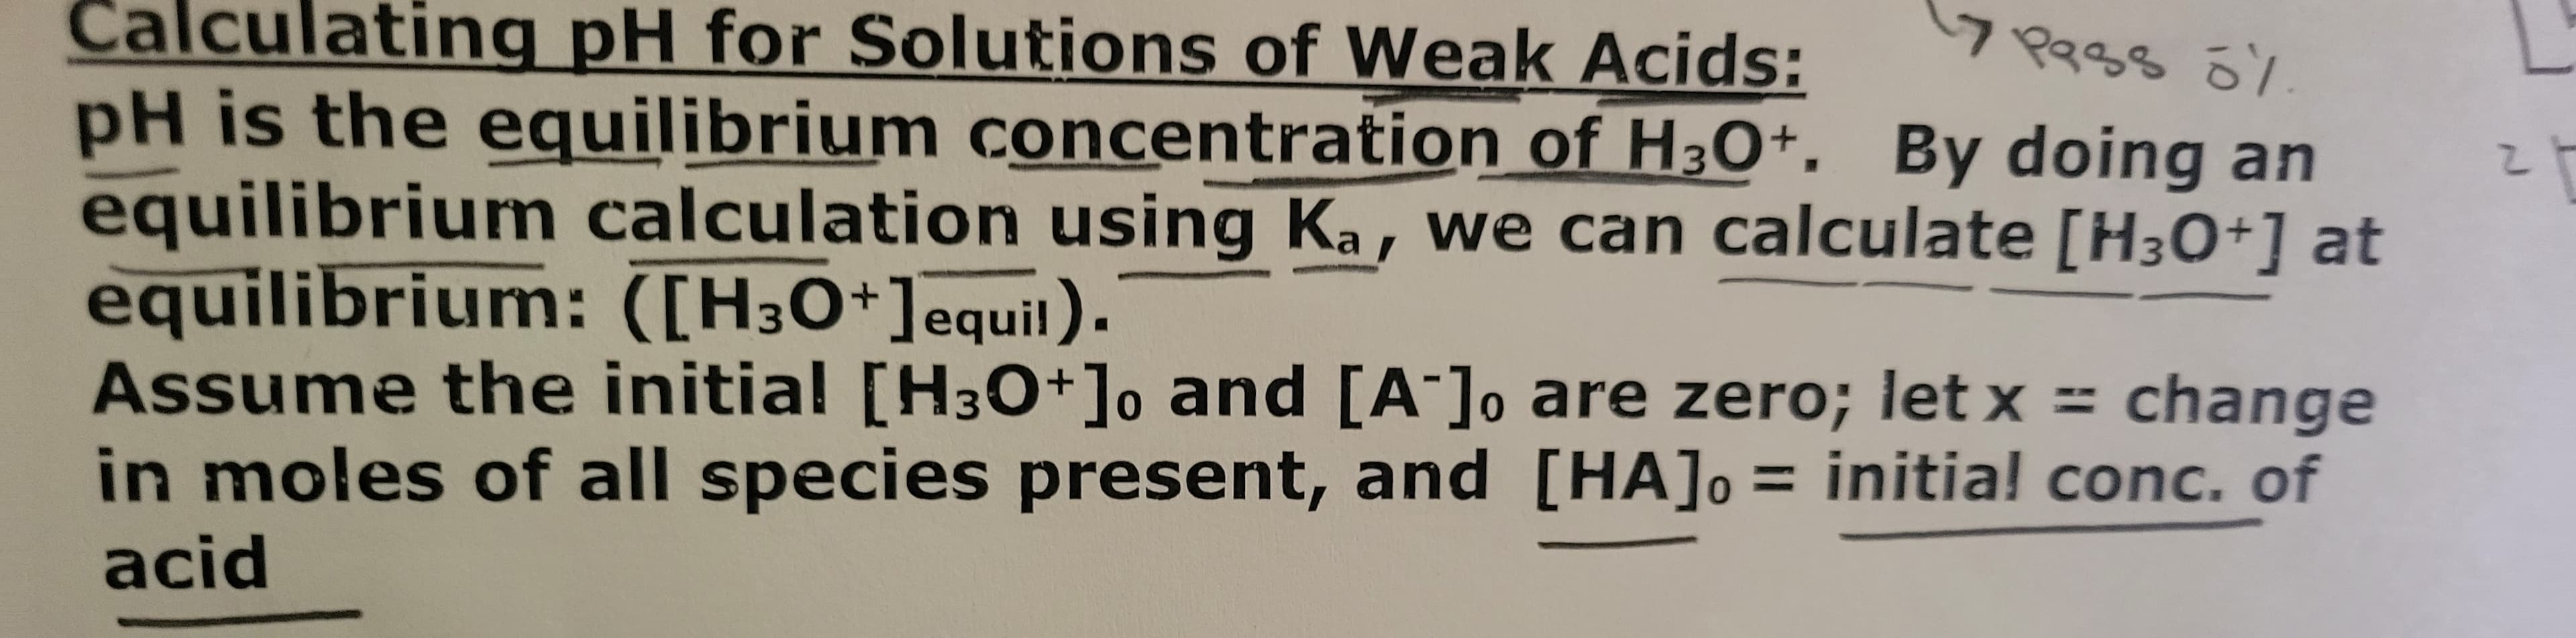 Calculating pH for Solutions of Weak Acids:
17 Pass 0%
pH is the equilibrium concentration of H3O+. By doing an
equilibrium calculation using Ka, we can calculate [H3O+] at
equilibrium: ([H3O+] equil).
Assume the initial [H3O+] and [A]
in moles of all species present, and
acid
are zero; let x = change
[HA] = initial conc. of
라